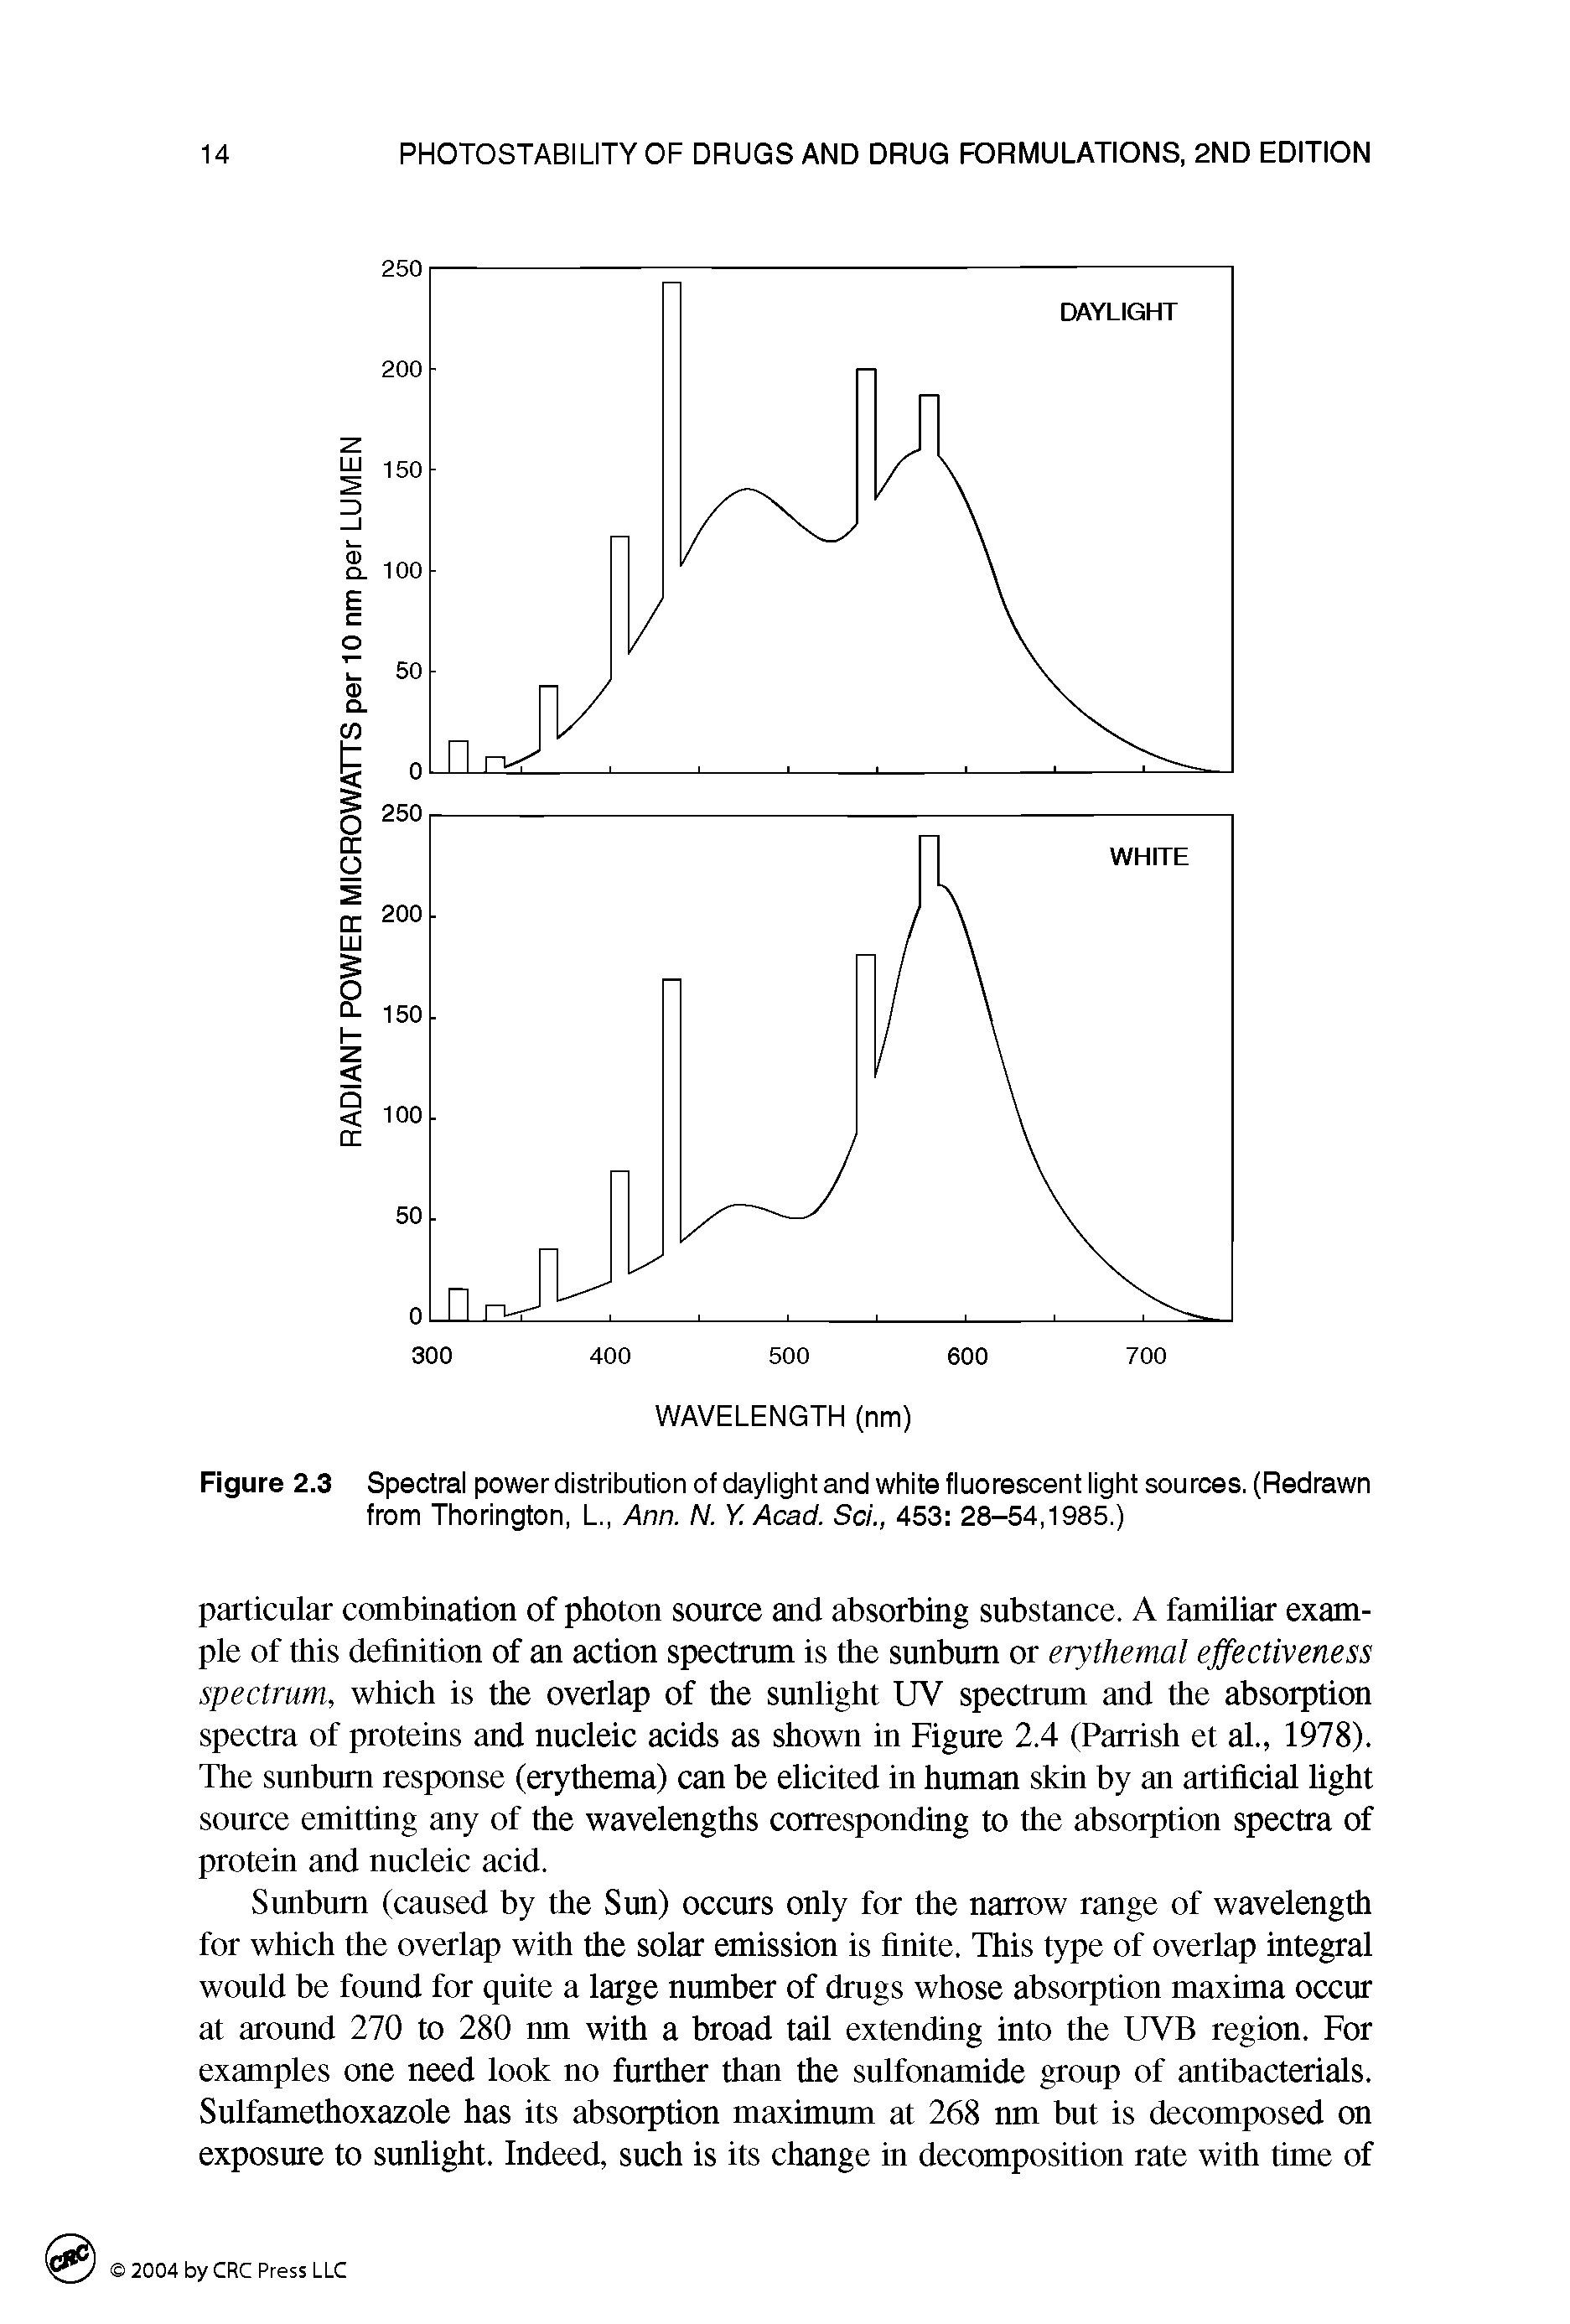 Figure 2.3 Spectral power distribution of daylight and white fluorescent light sources. (Redrawn from Thorington, L., Ann. N. Y. Acad. Sci., 453 28-54,1985.)...